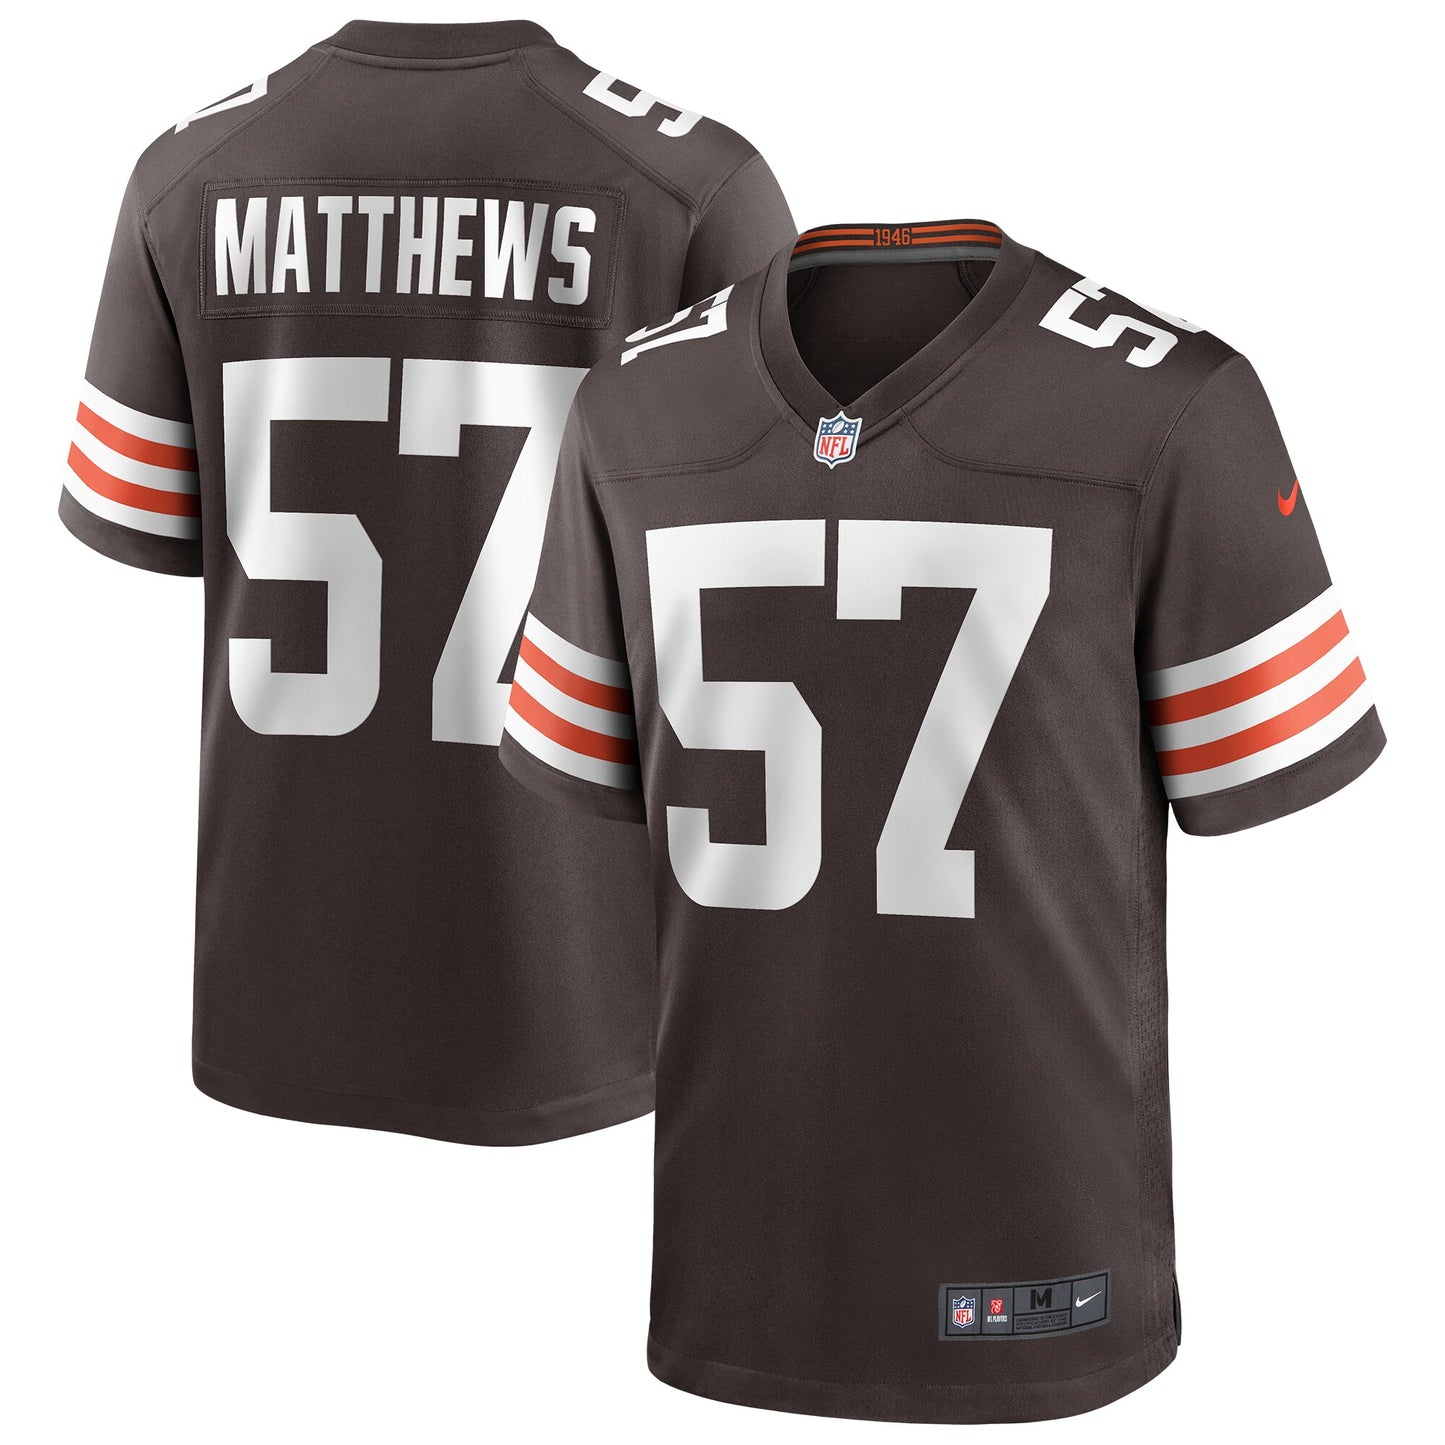 Clay Matthews Cleveland Browns Nike Game Retired Player Jersey - Brown